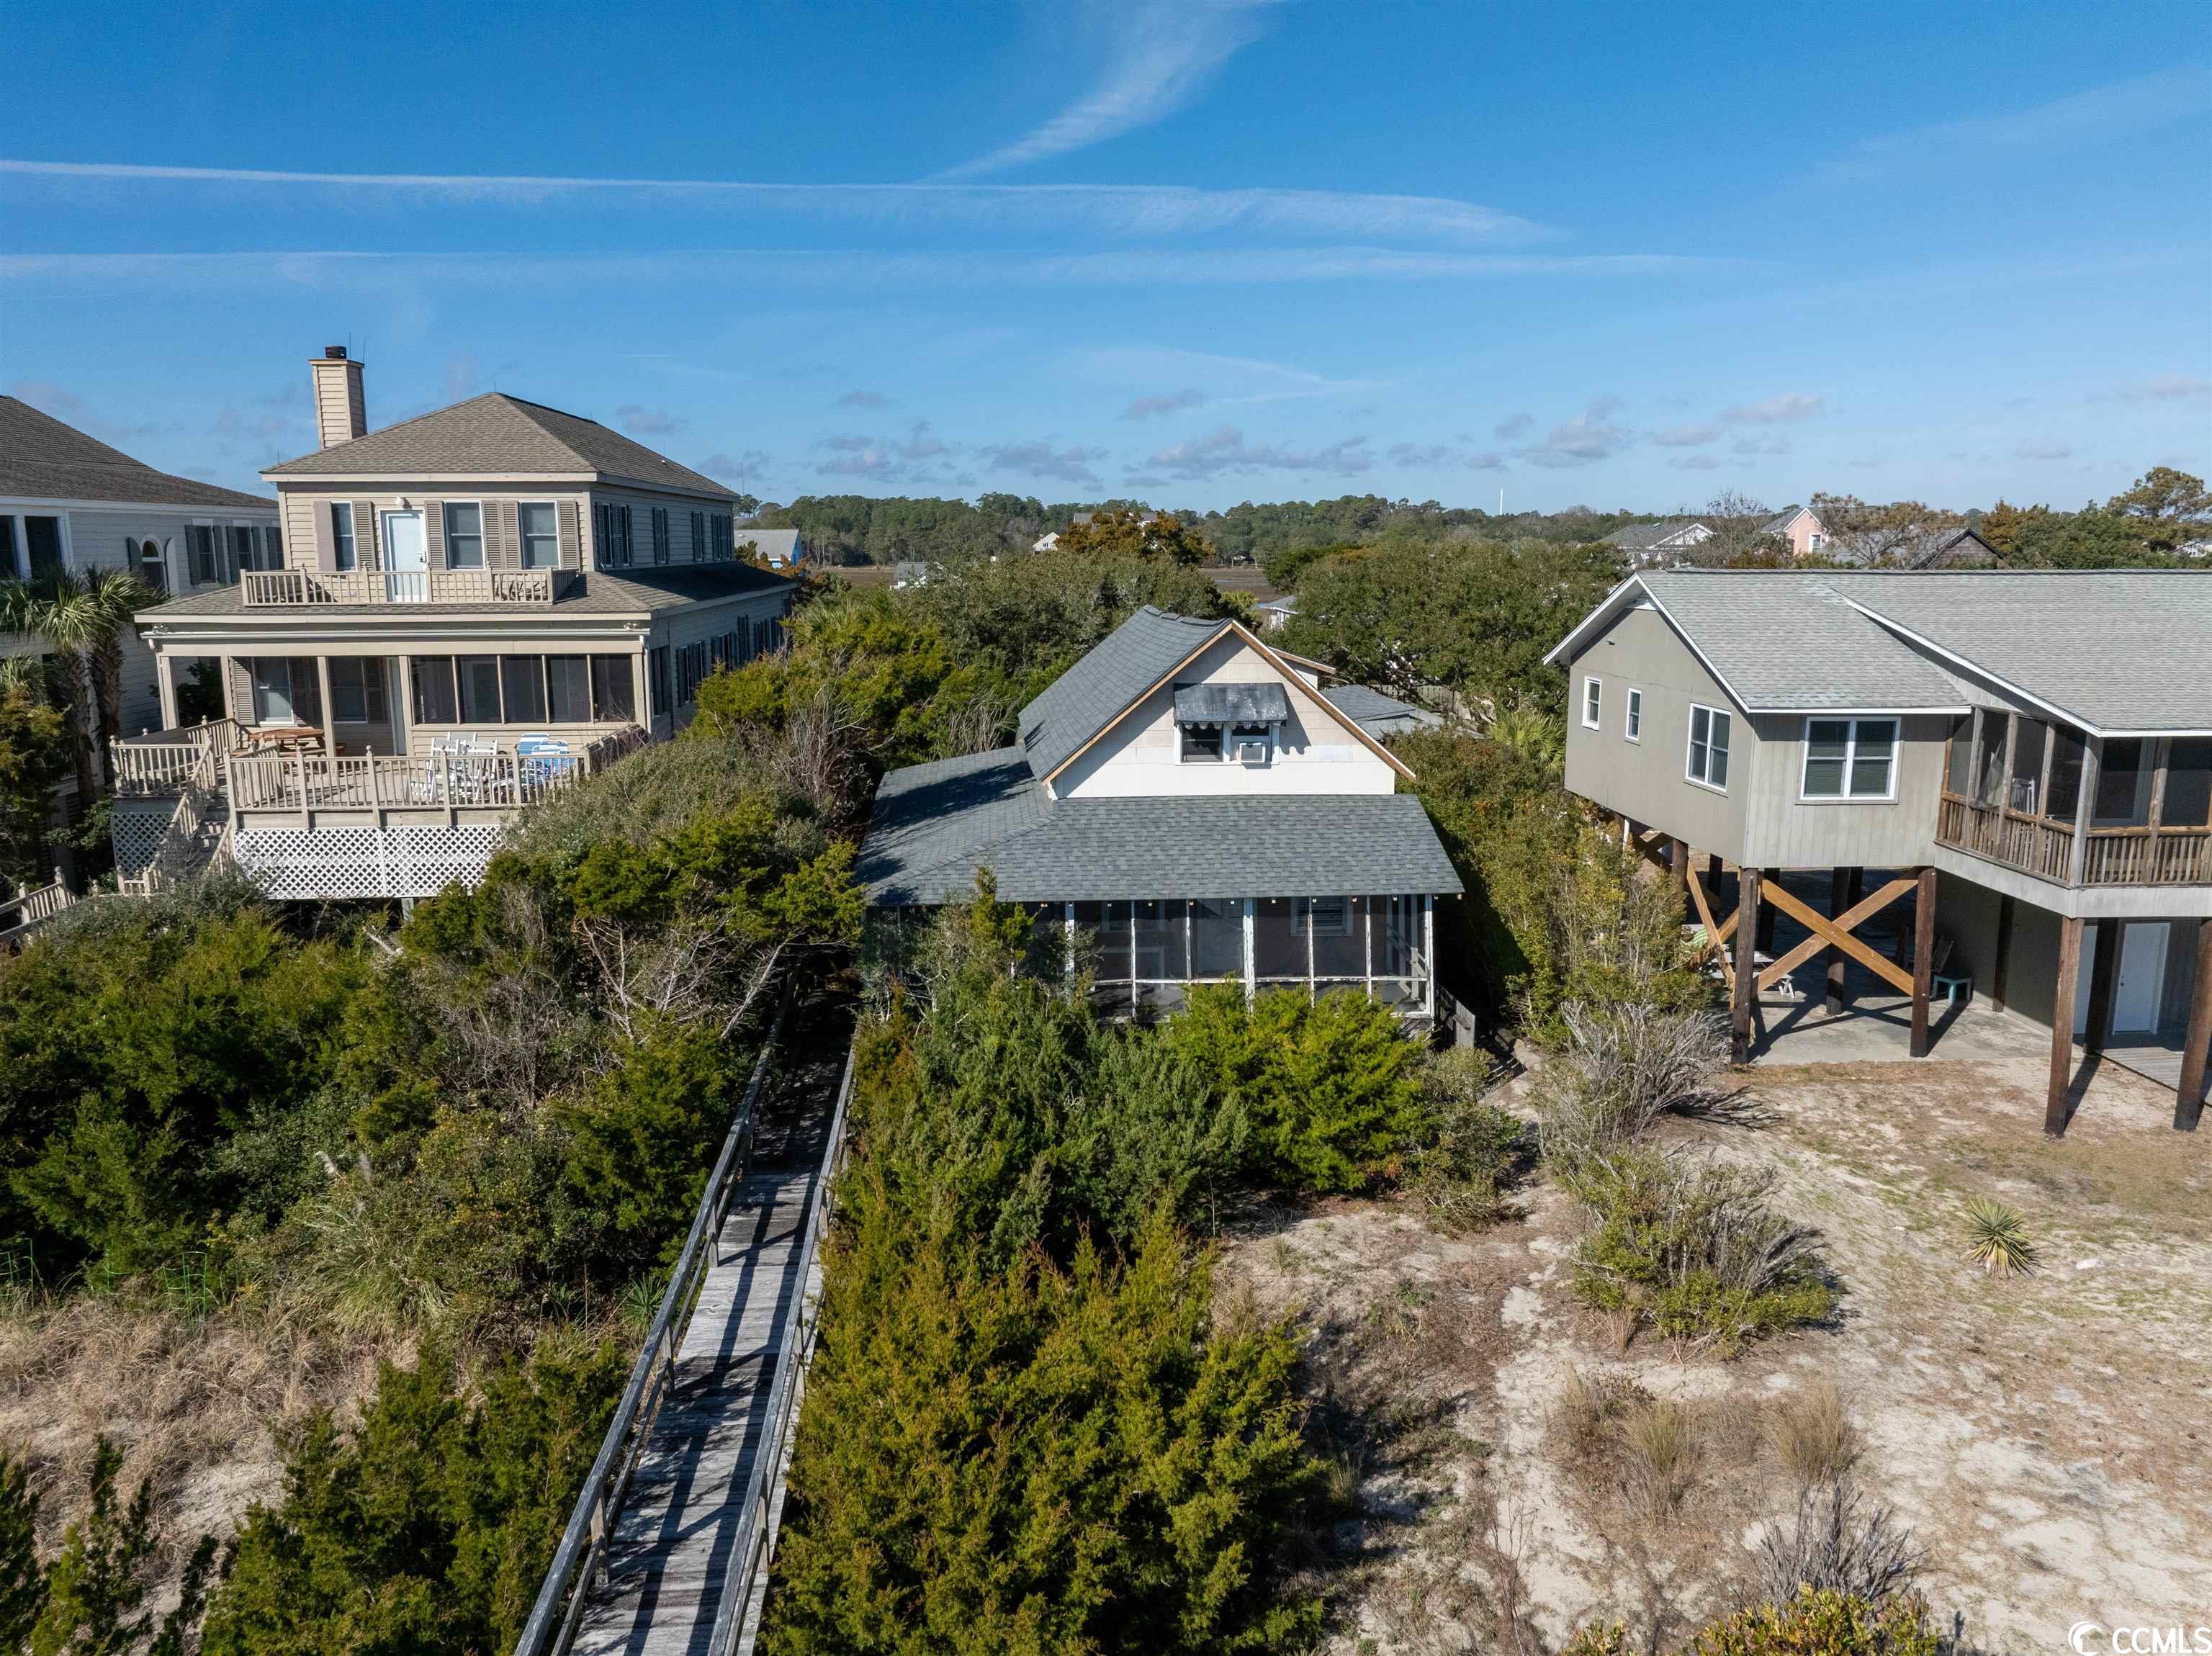 rare ocean front dream home opportunity! this beach house sits on the very desirable north end of pawleys island. you can build your dream home on this beautiful lot, with amazing views of the ocean. the sellers had building plans drawn up, which are in the associated documents. watch breathtaking sunsets from a porch or boardwalk overlooking the ocean.  this is a true gem in a prime location on pawleys island with things to do all year round such as kayaking, fishing, biking, and more! don't miss out on this fantastic property with endless opportunities!